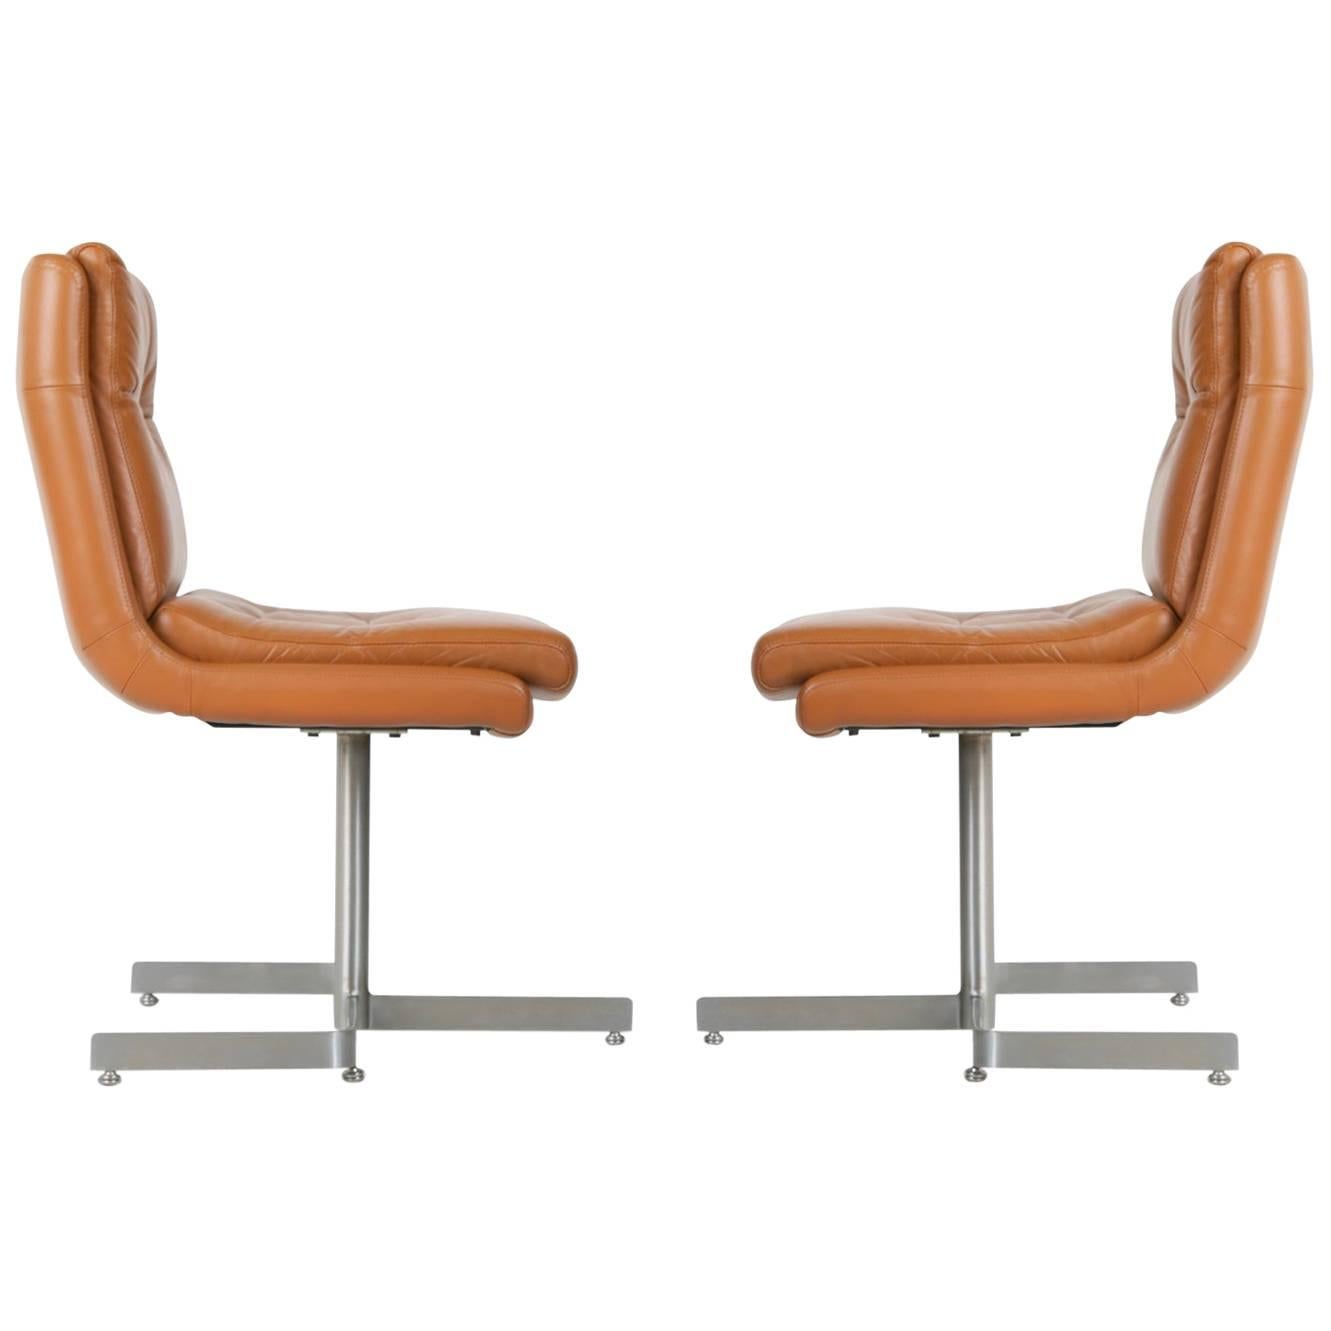 Pair of Leather and Steel Lounge Chairs by Raphael, France, circa 1970